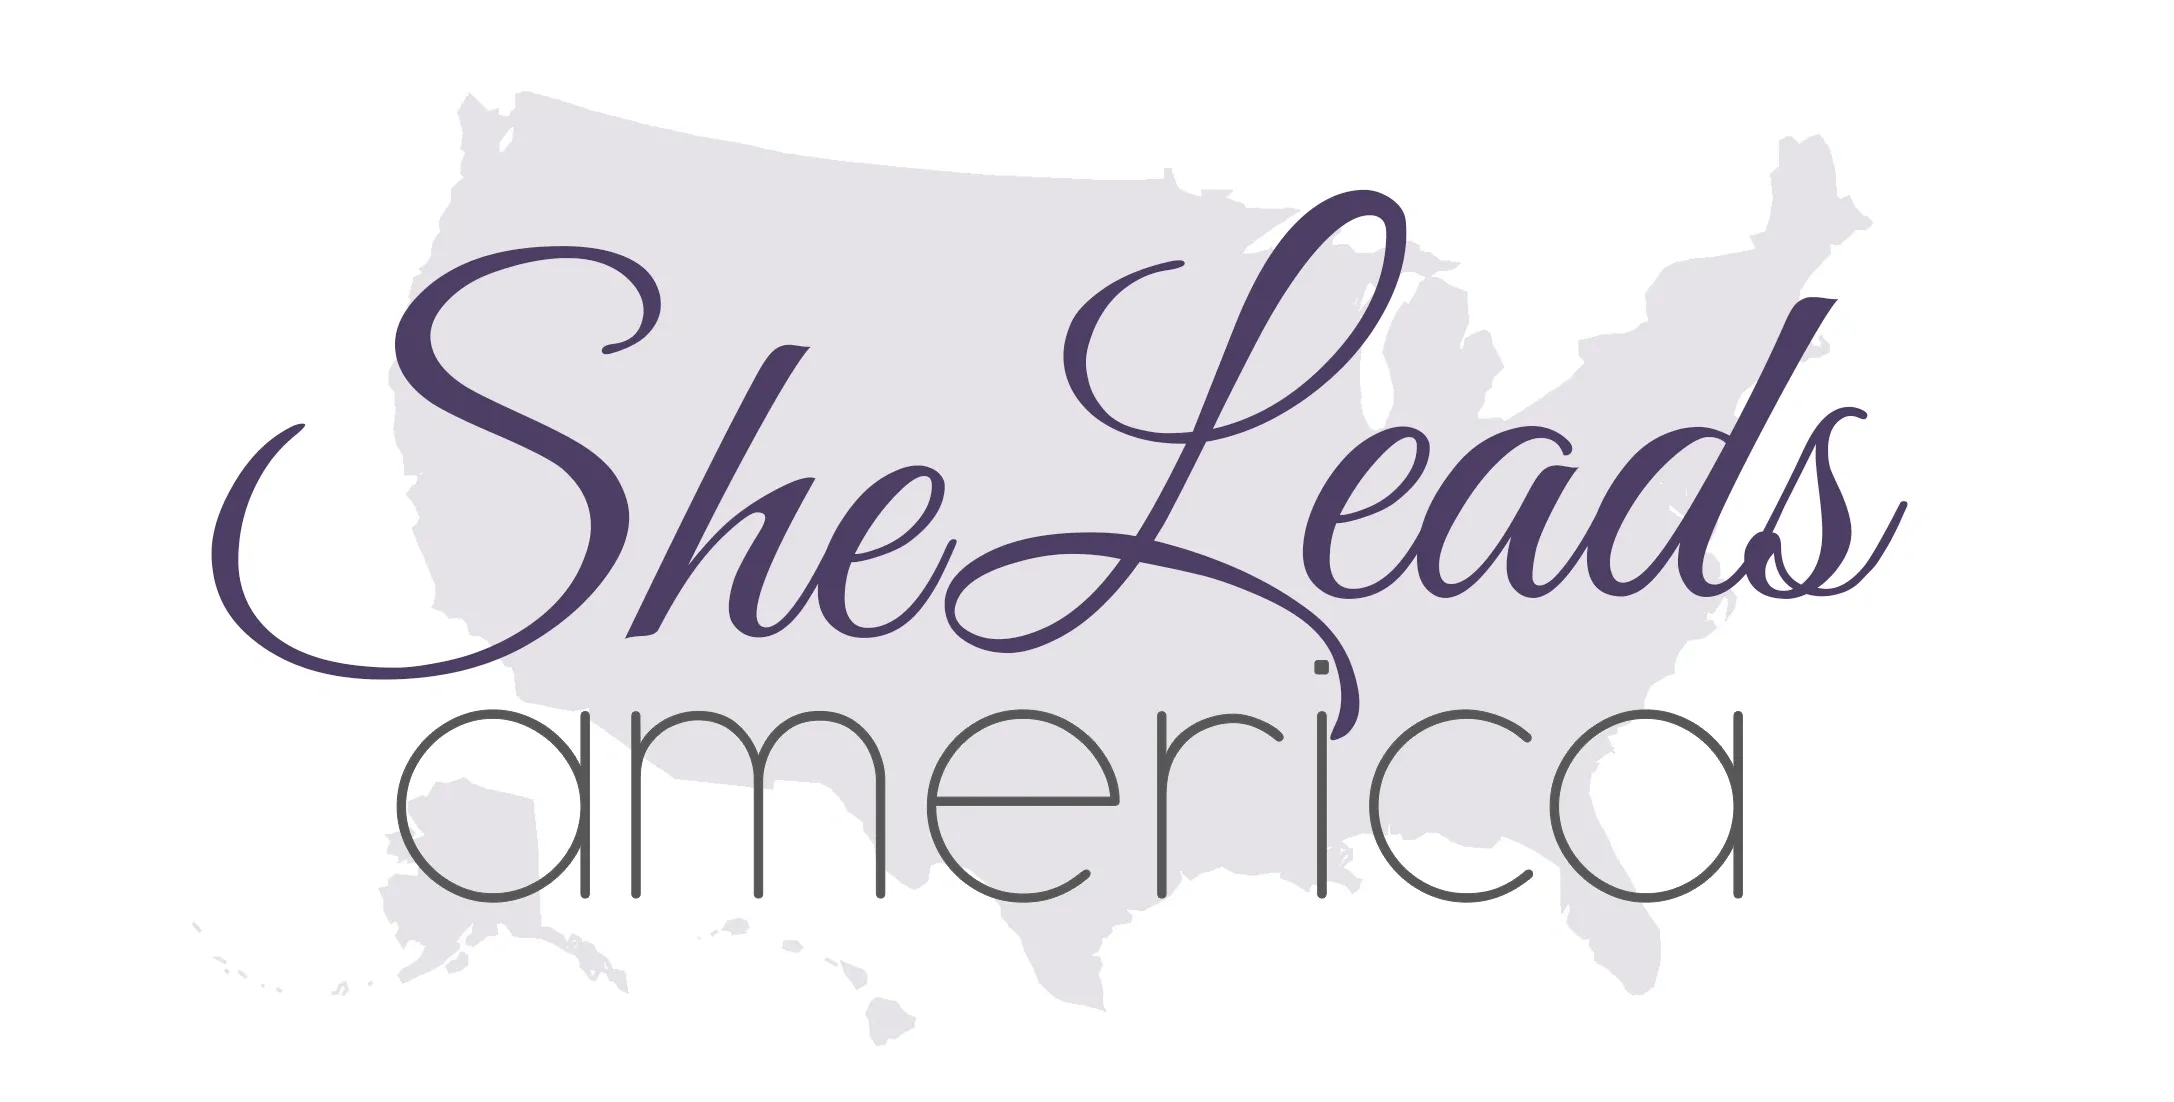 A graphic of America with the words "She Leads America" superimposed over it.